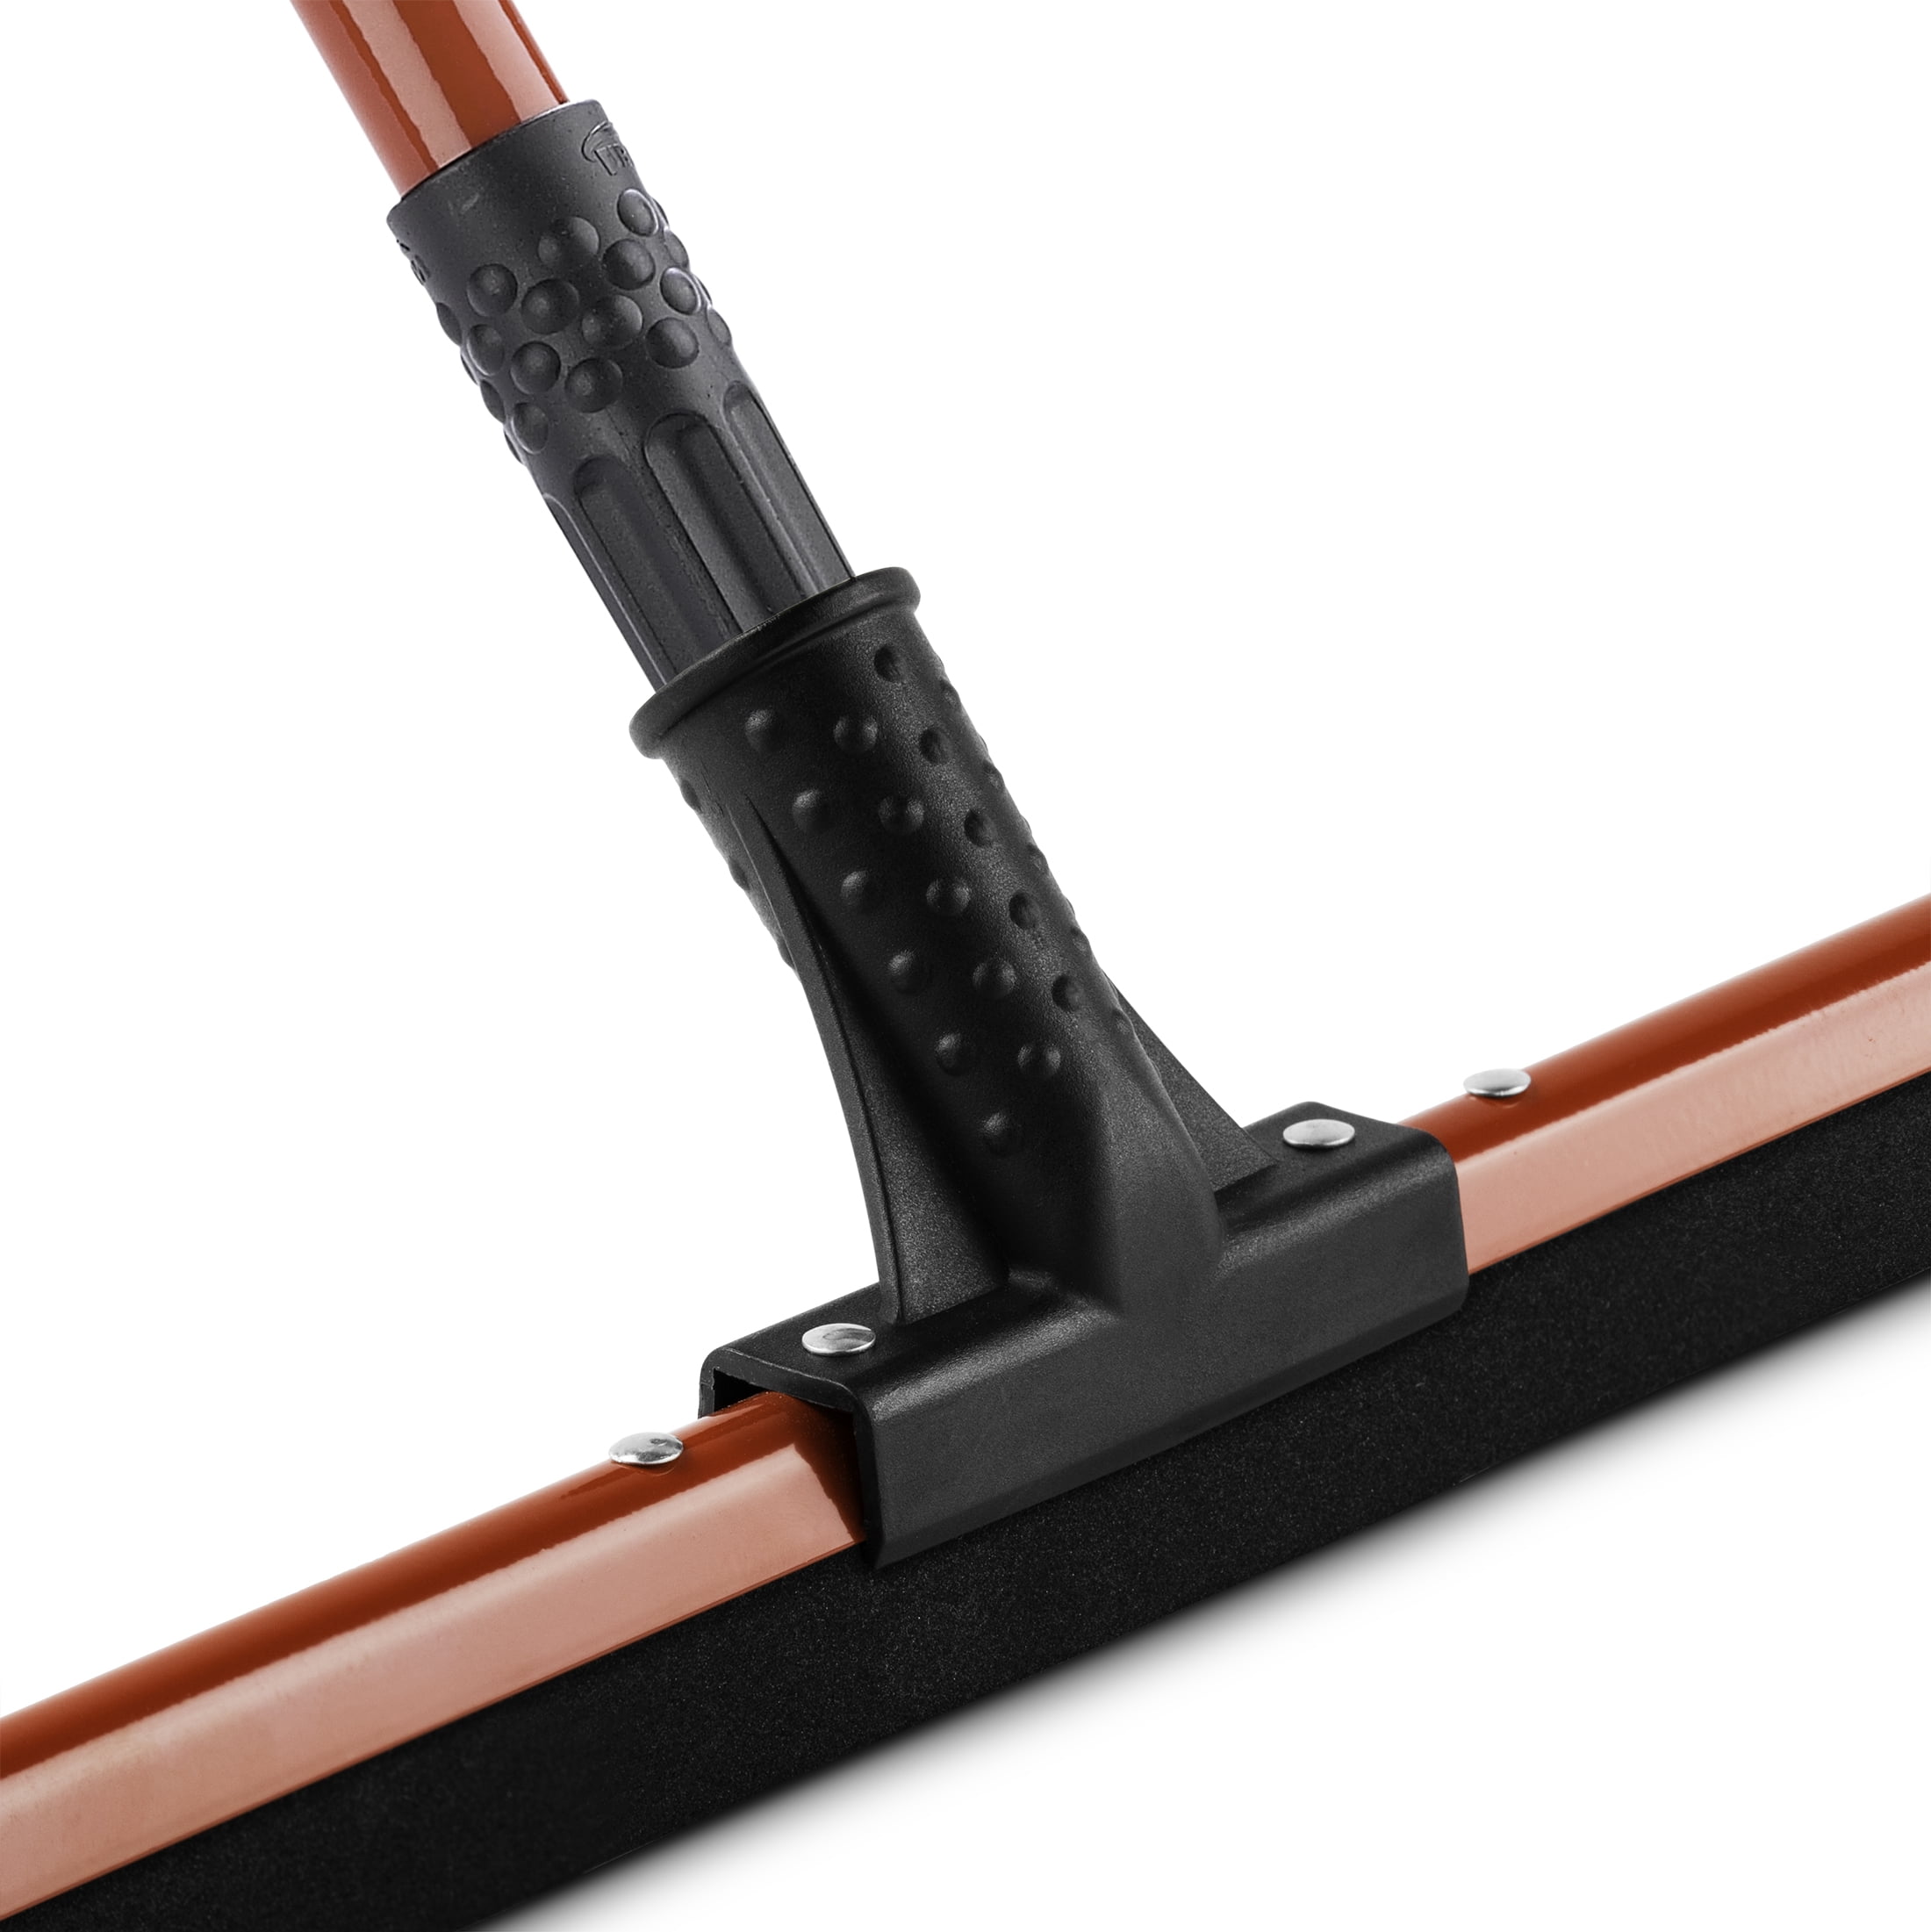 Flex Blade 18 Squeegee wIth Handle